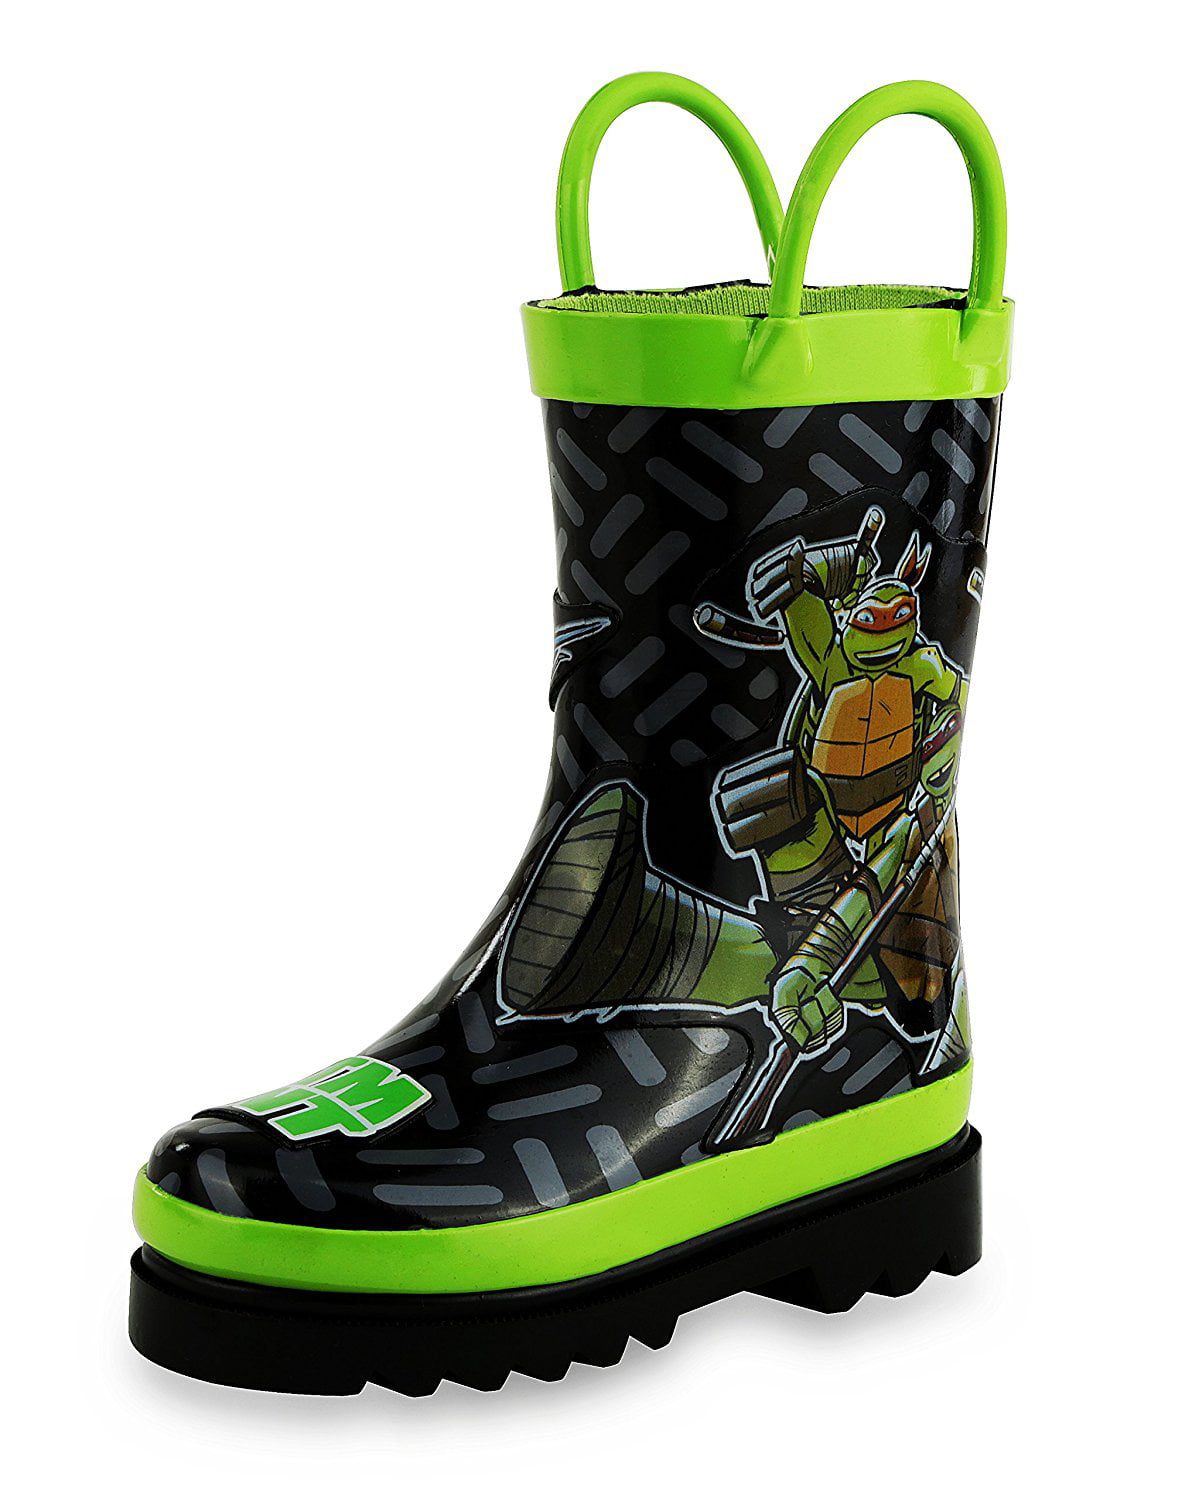 Details about   Boys Nickelodeon Wellington Boots Turtles